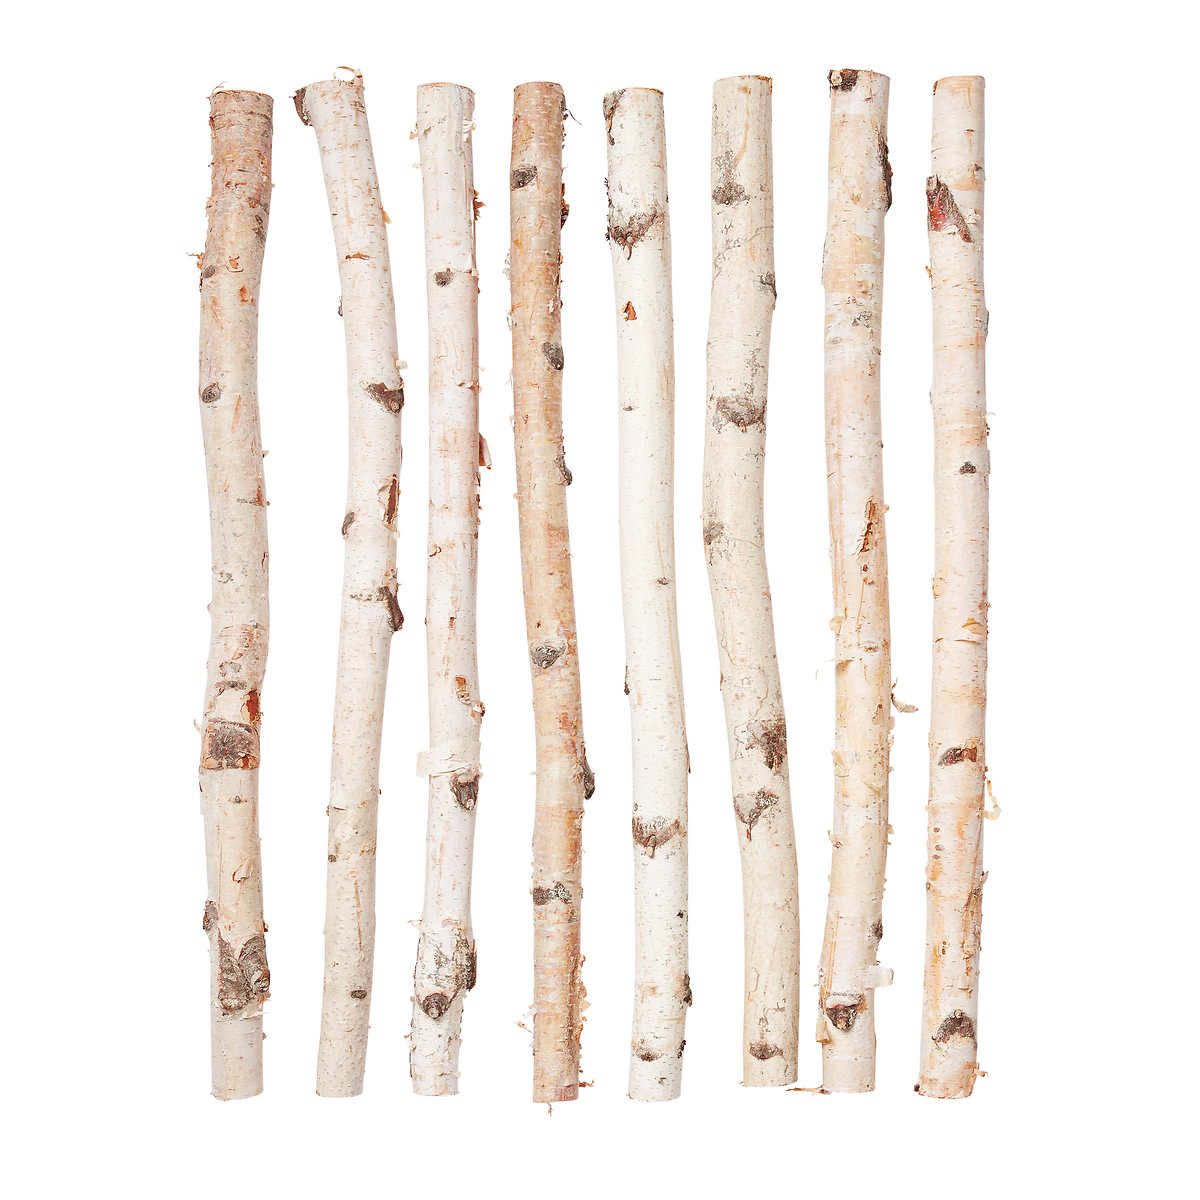 Birch Forked Poles Y Poles V Poles Branches ( One Pole )